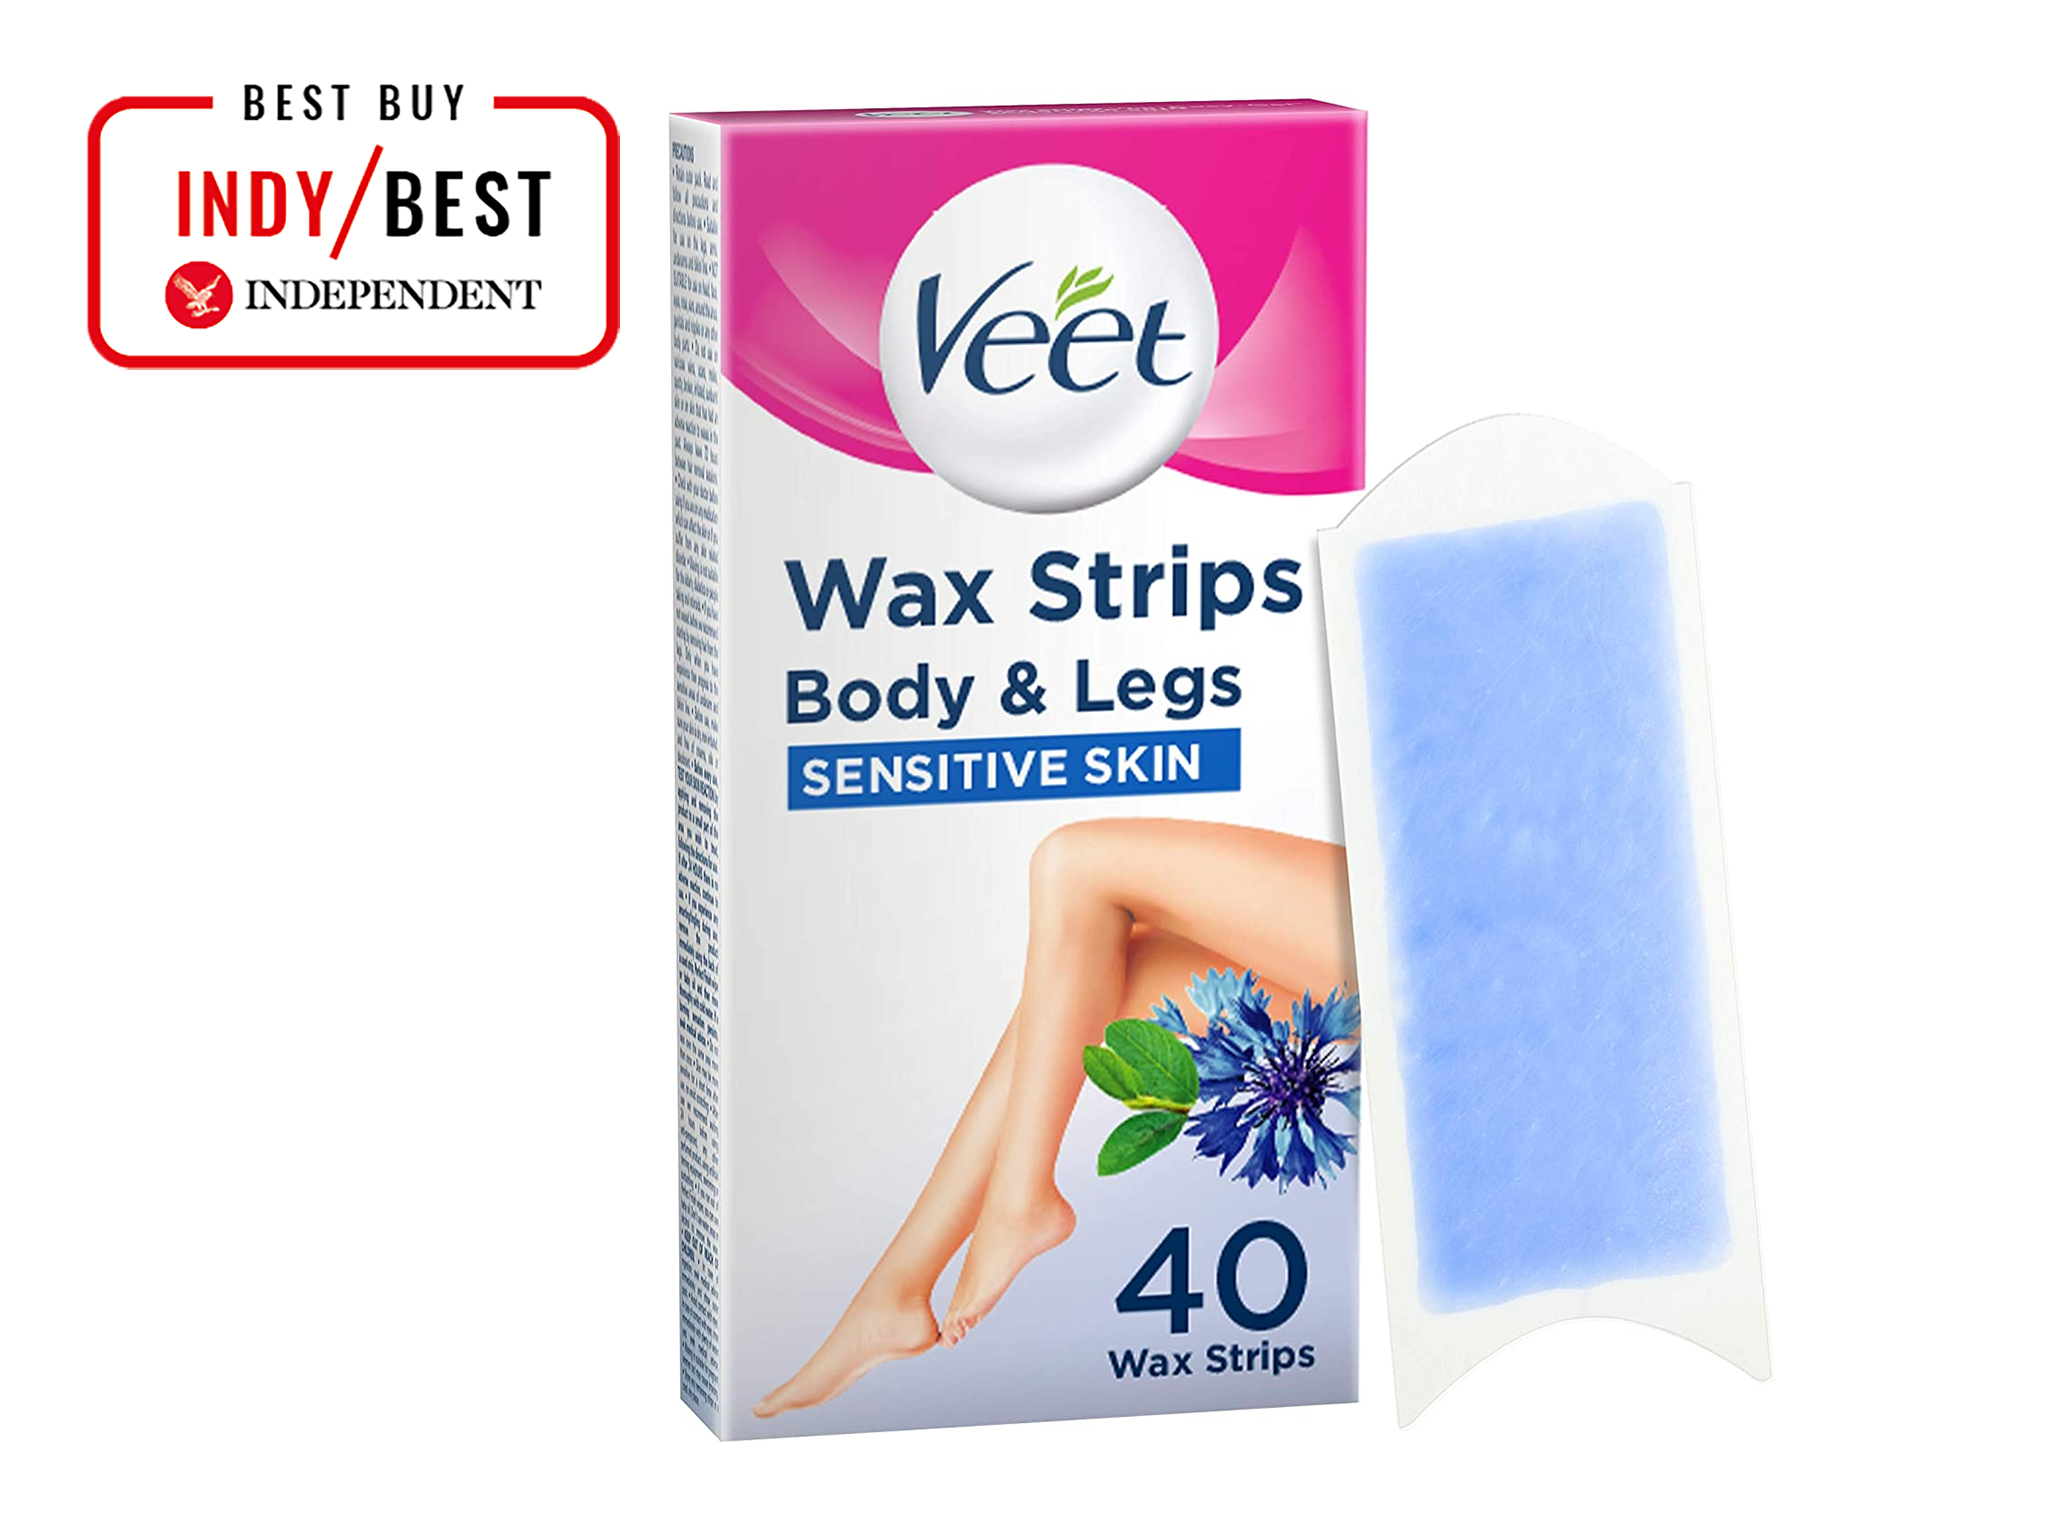 wax strips for sensitive skin for body and legs